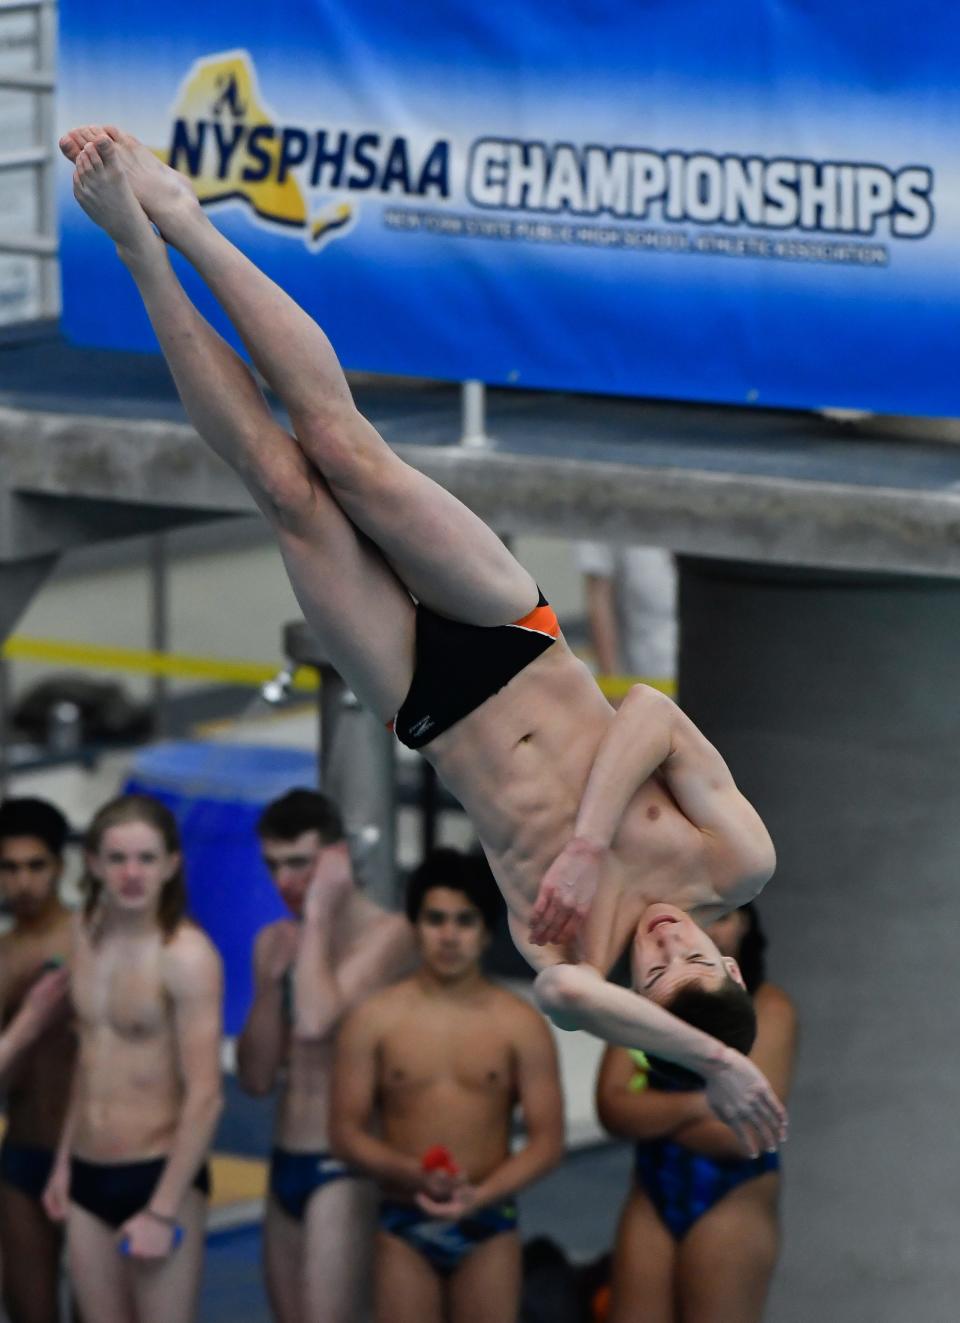 Pittsford's Daley Fraser executes a dive during the 2022 NYSPHSAA Boys Swimming & Diving Championships in Ithaca, N.Y., Friday, March 4, 2022.